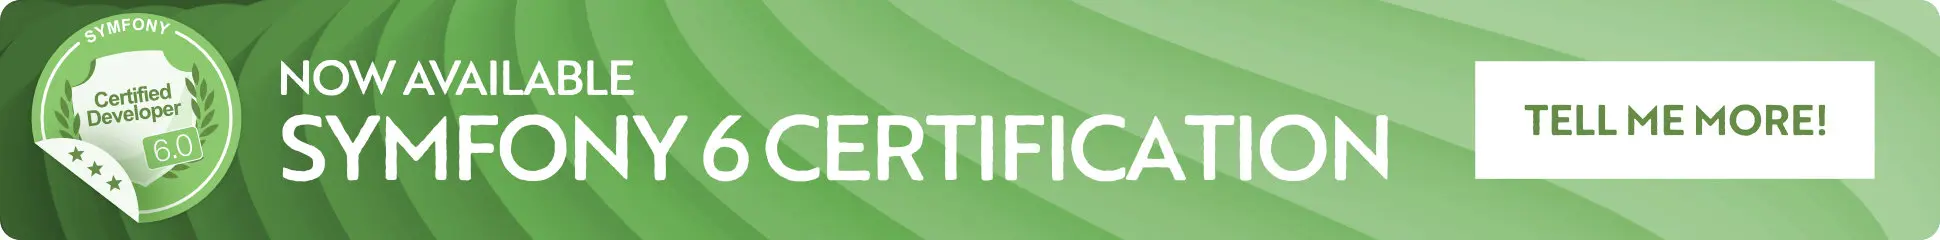 Introducing the certification exam for Sylius, the e-commerce solution based on Symfony